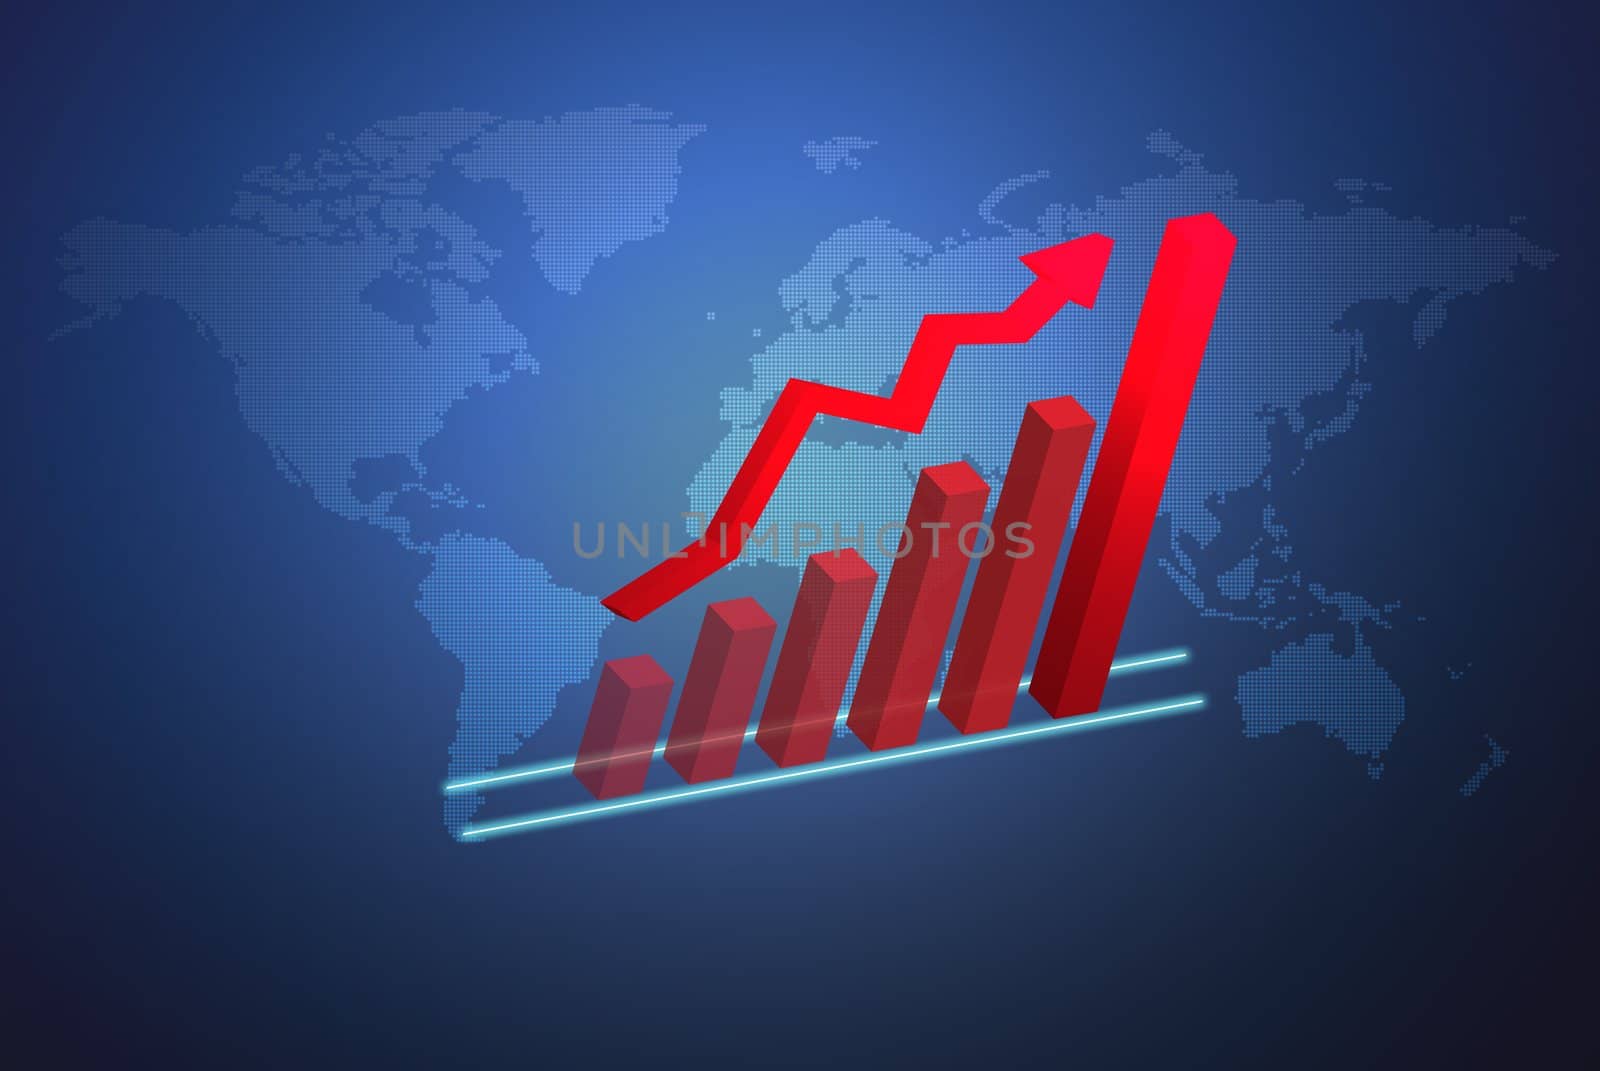 The global economy business concept with 3D growth chart, can be use for related global business, finance futuristic minimalist concepts